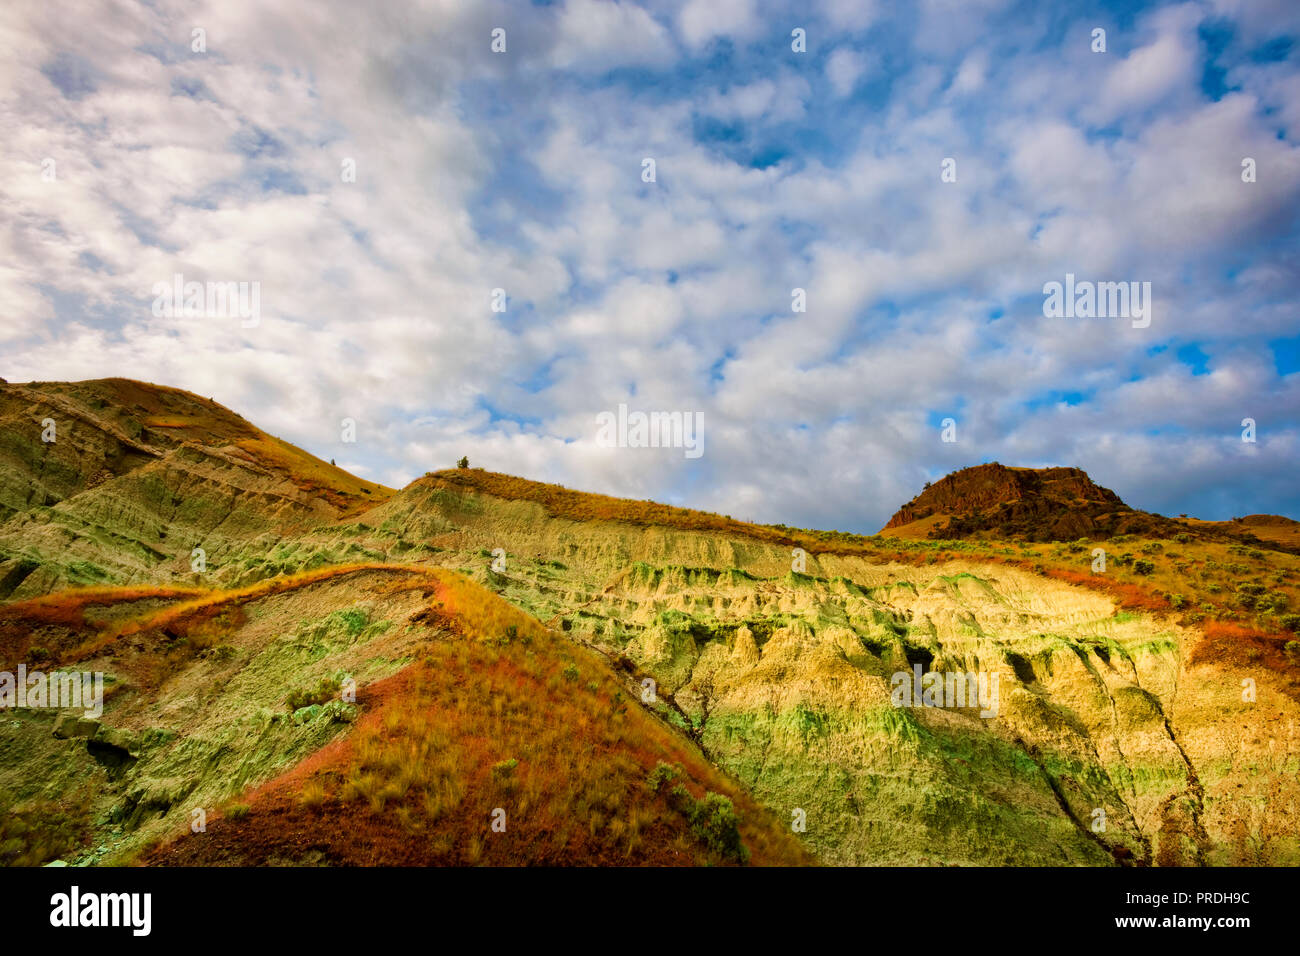 Early morning light in the Blue Basin in the Sheep Rock Unit of the John Day Fossil Beds National Monument near Kimberly, Oregon Stock Photo